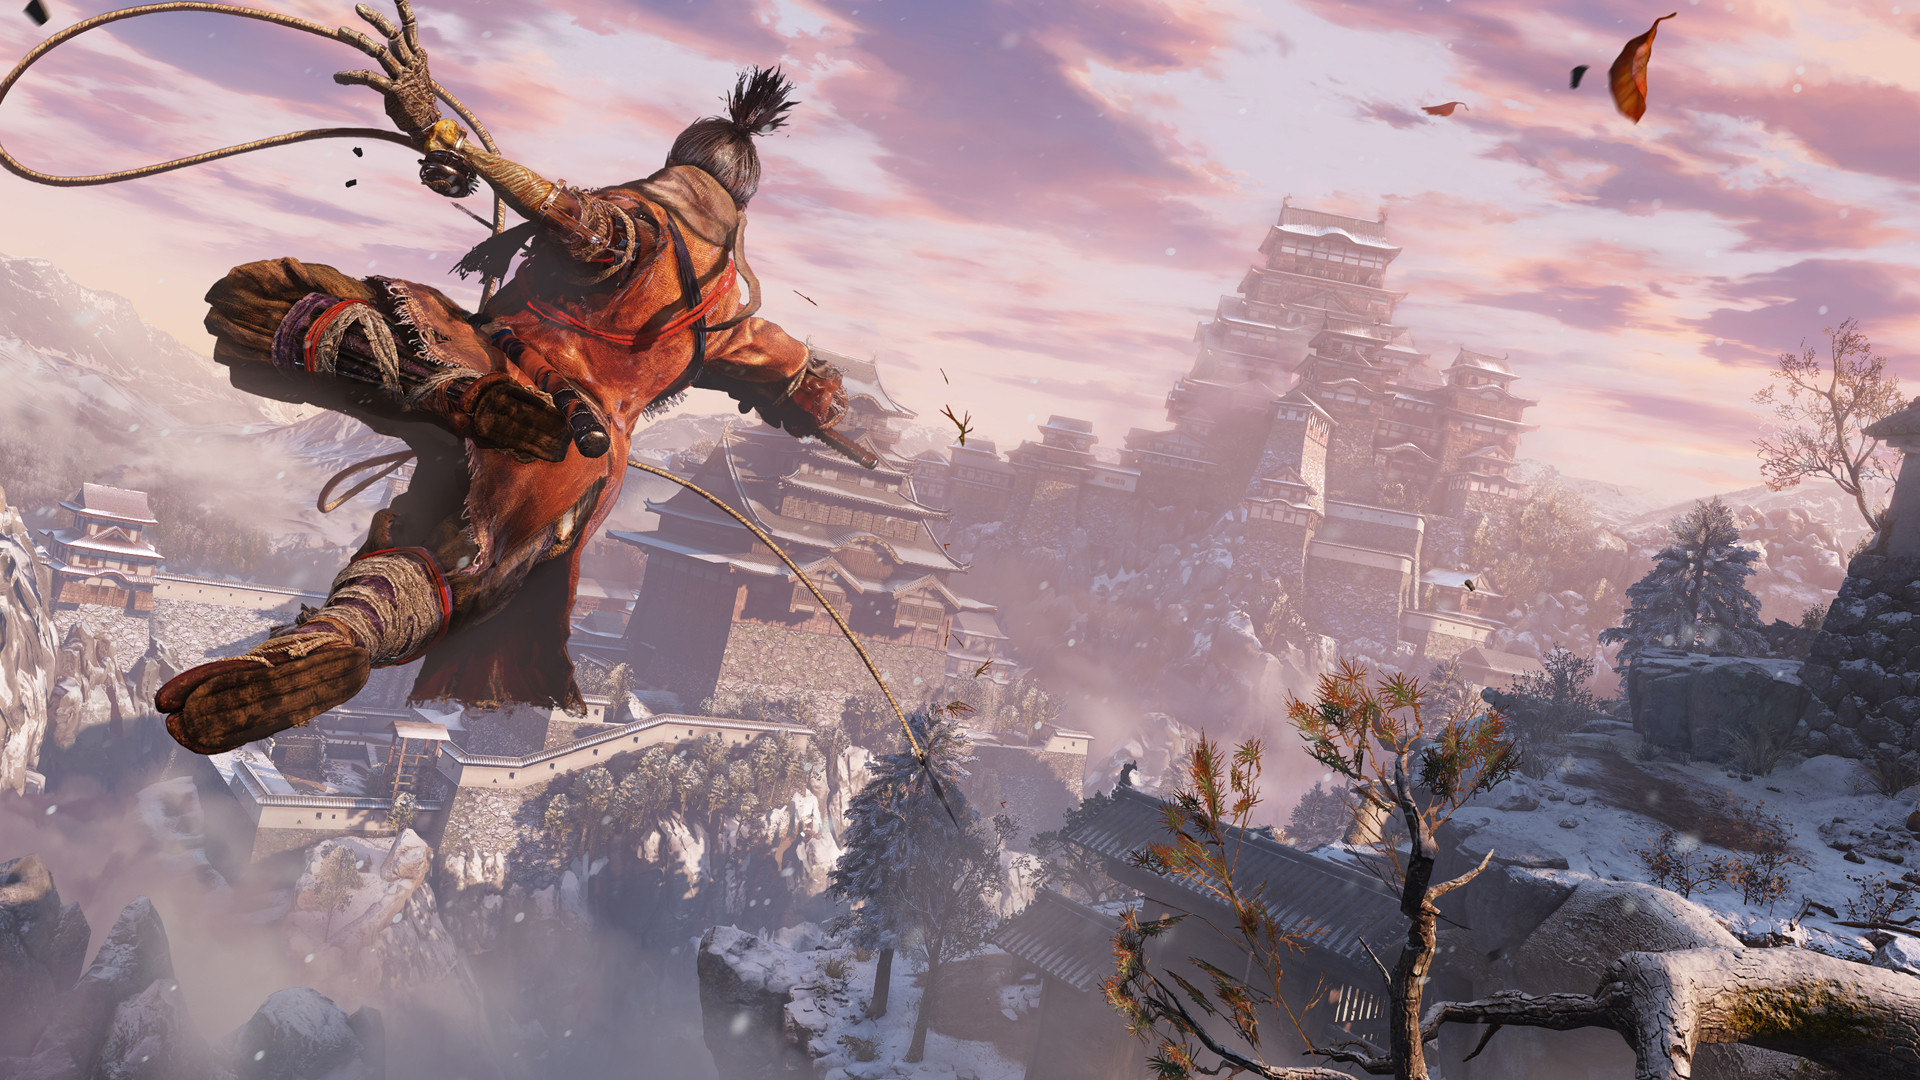 Sekiro: Shadows Die Twice To Find All 40 Prayer Beads% Health Upgrade Guide